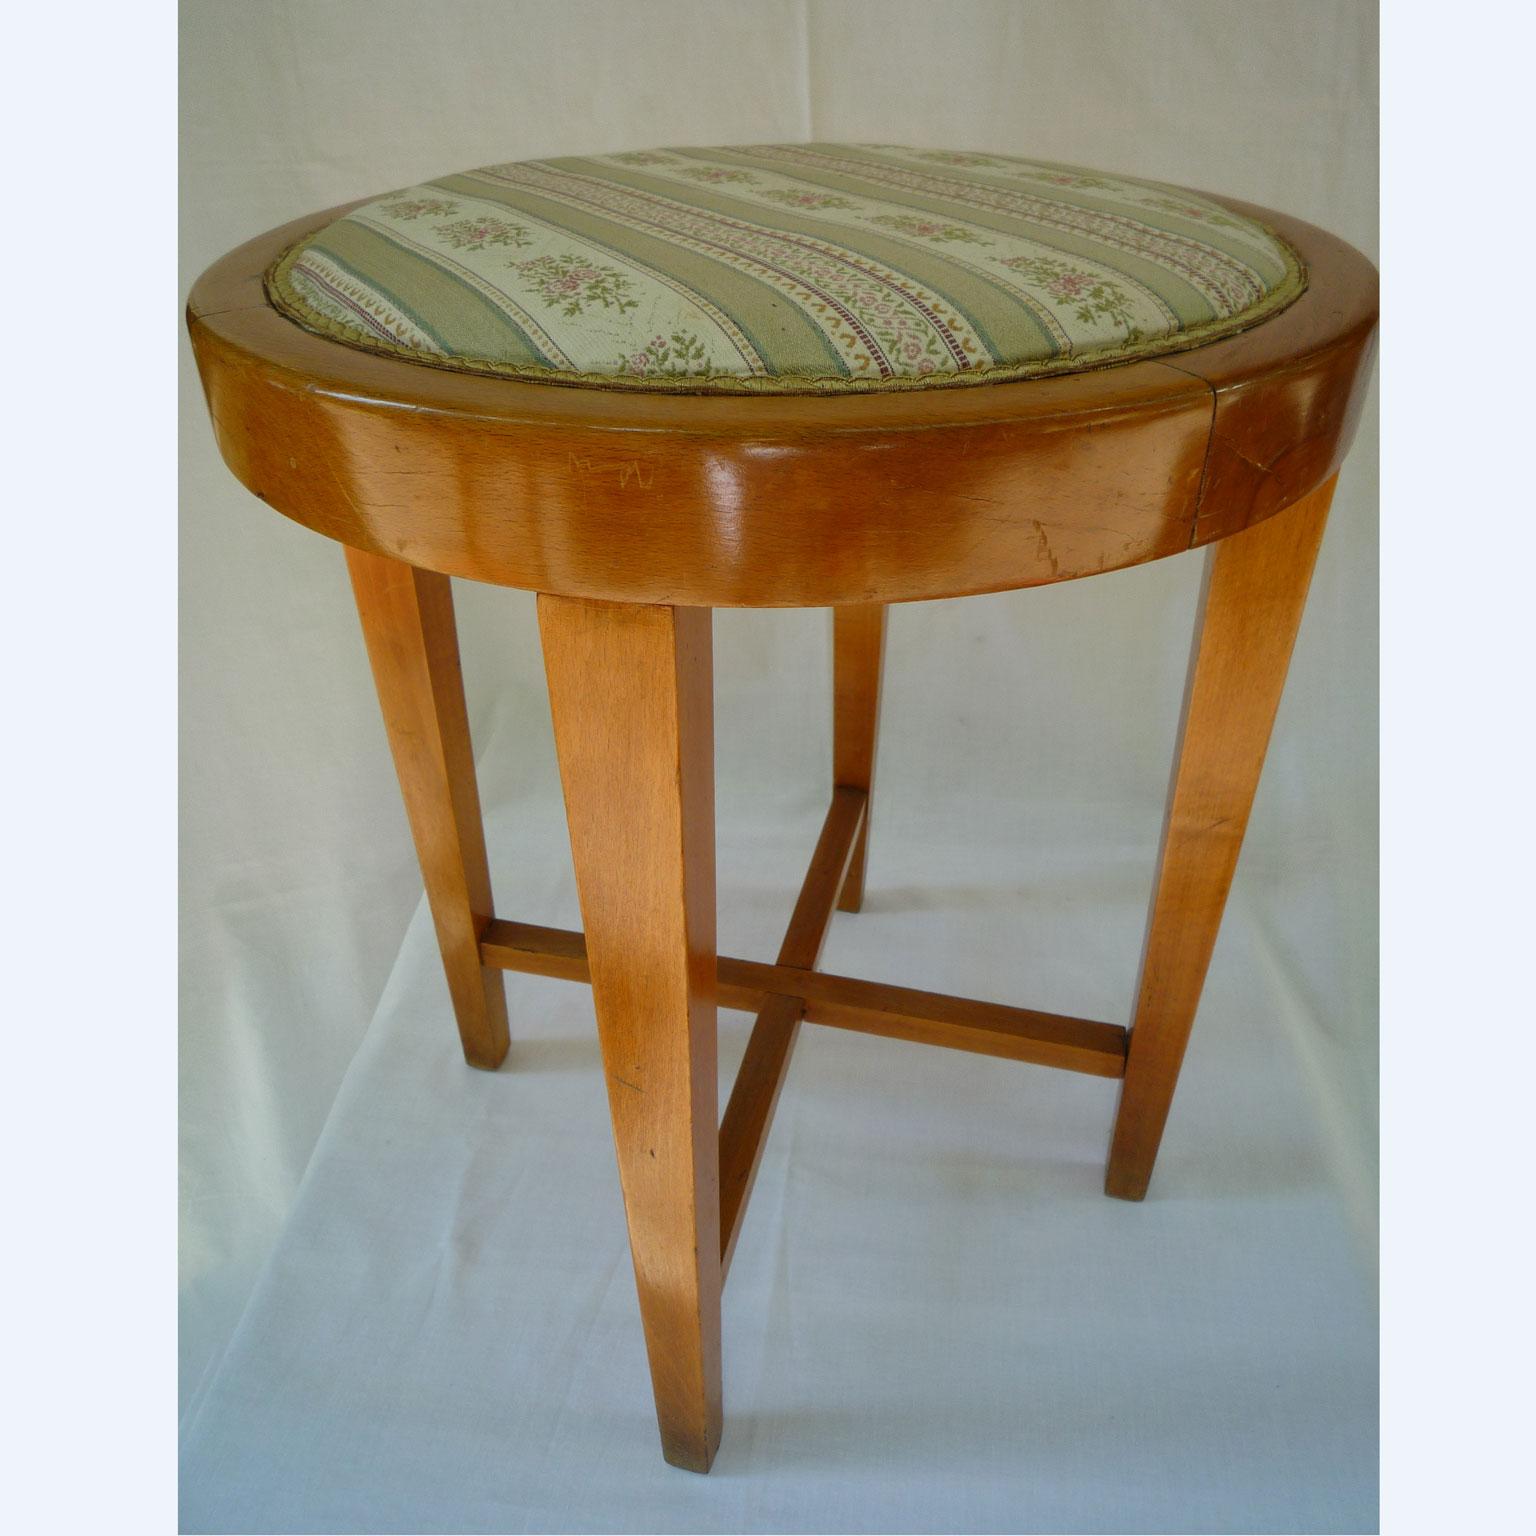 Stool classicism beech
Small stool made of beech stained to cherry, shellac polish. The small seat shows some traces of use, but the condition is such that it can be brought immediately into the well-kept household. The upholstery is still in